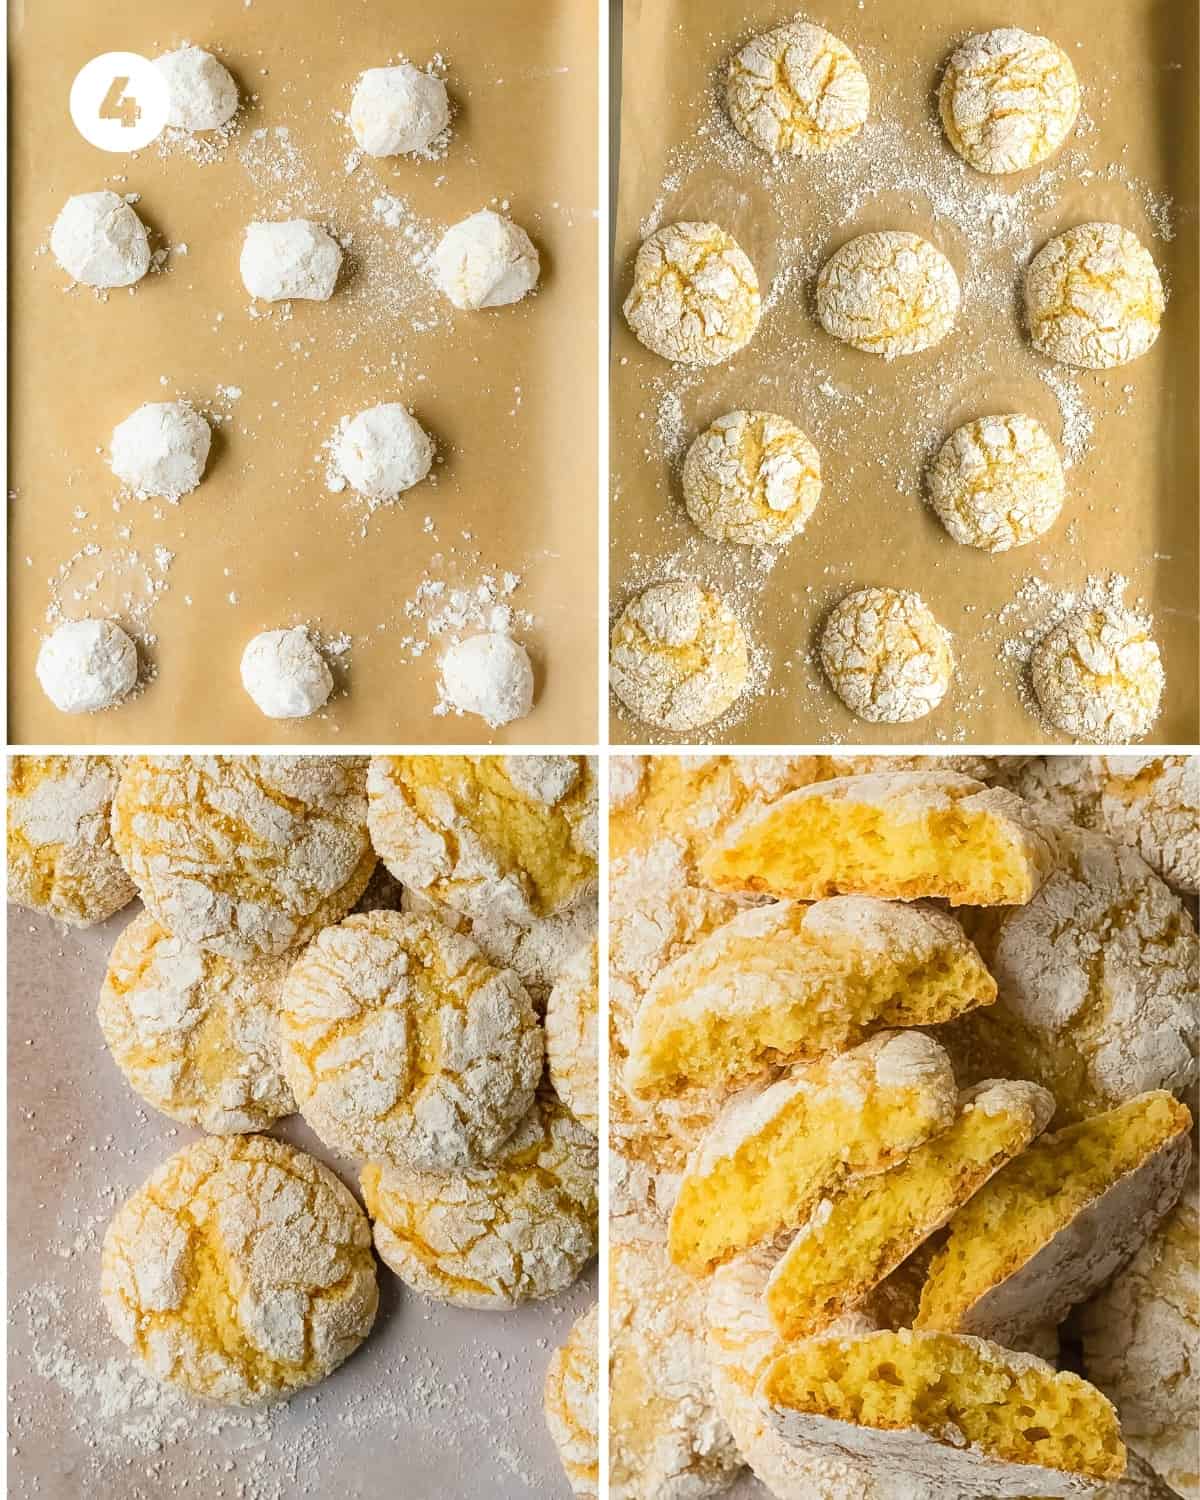 Place the lemon cake mix cookies on the baking sheet. Bake for 11-13 minutes or until the edges of the cookies are set. Cool on the hot baking sheet for 3 minutes. Transfer to a cooling rack to fully cool and enjoy!